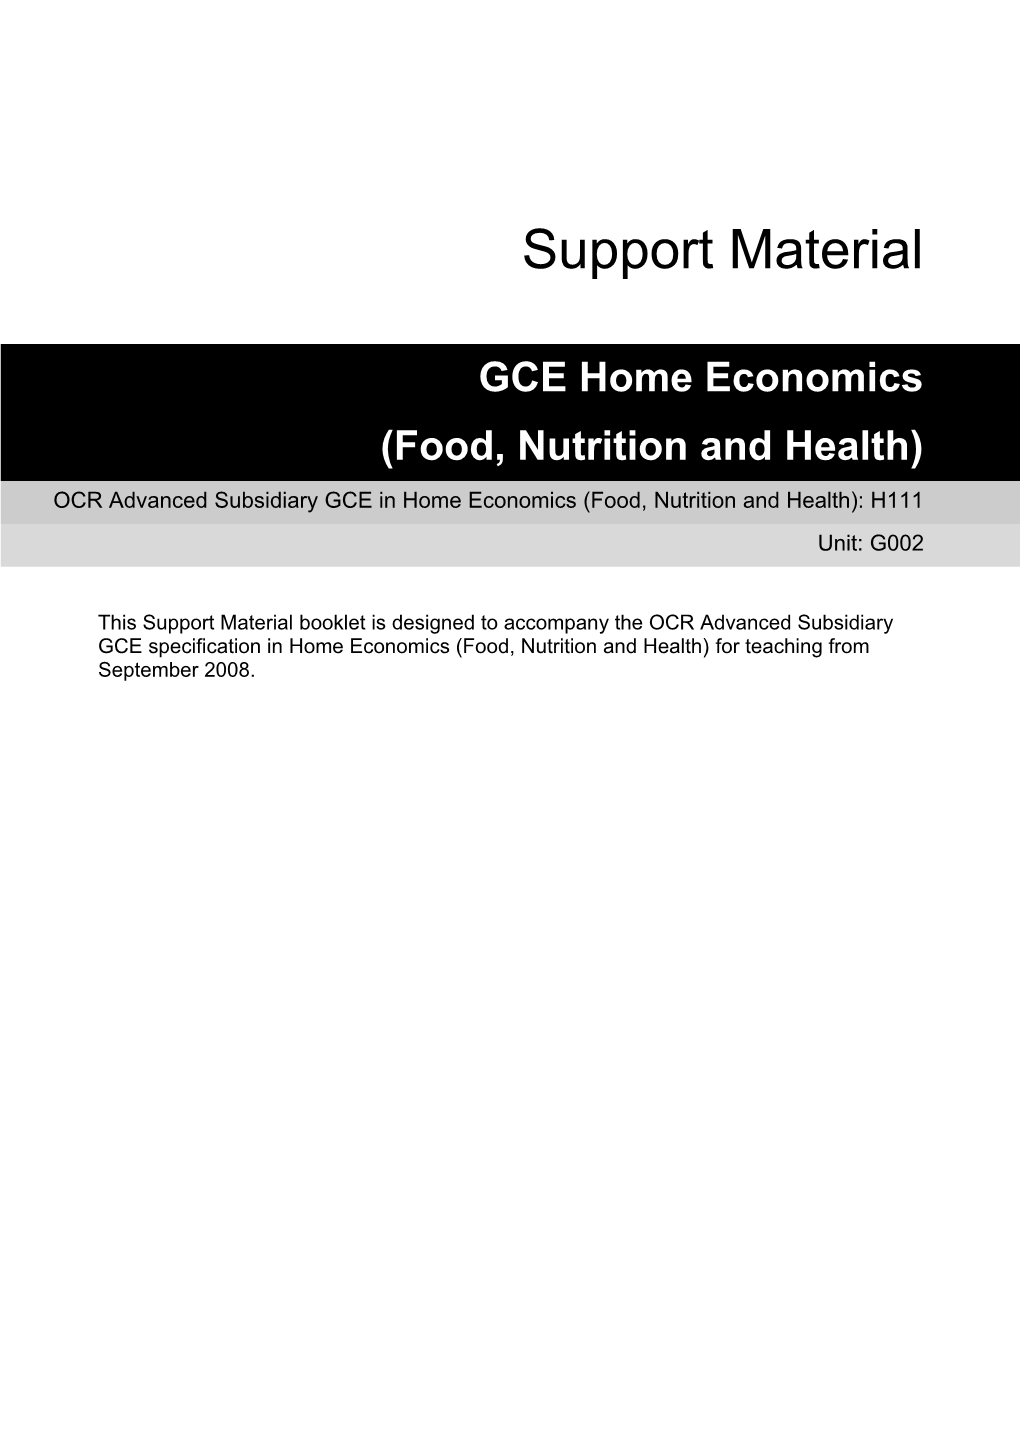 OCR Advanced Subsidiary GCE in Home Economics (Food, Nutrition and Health): H111